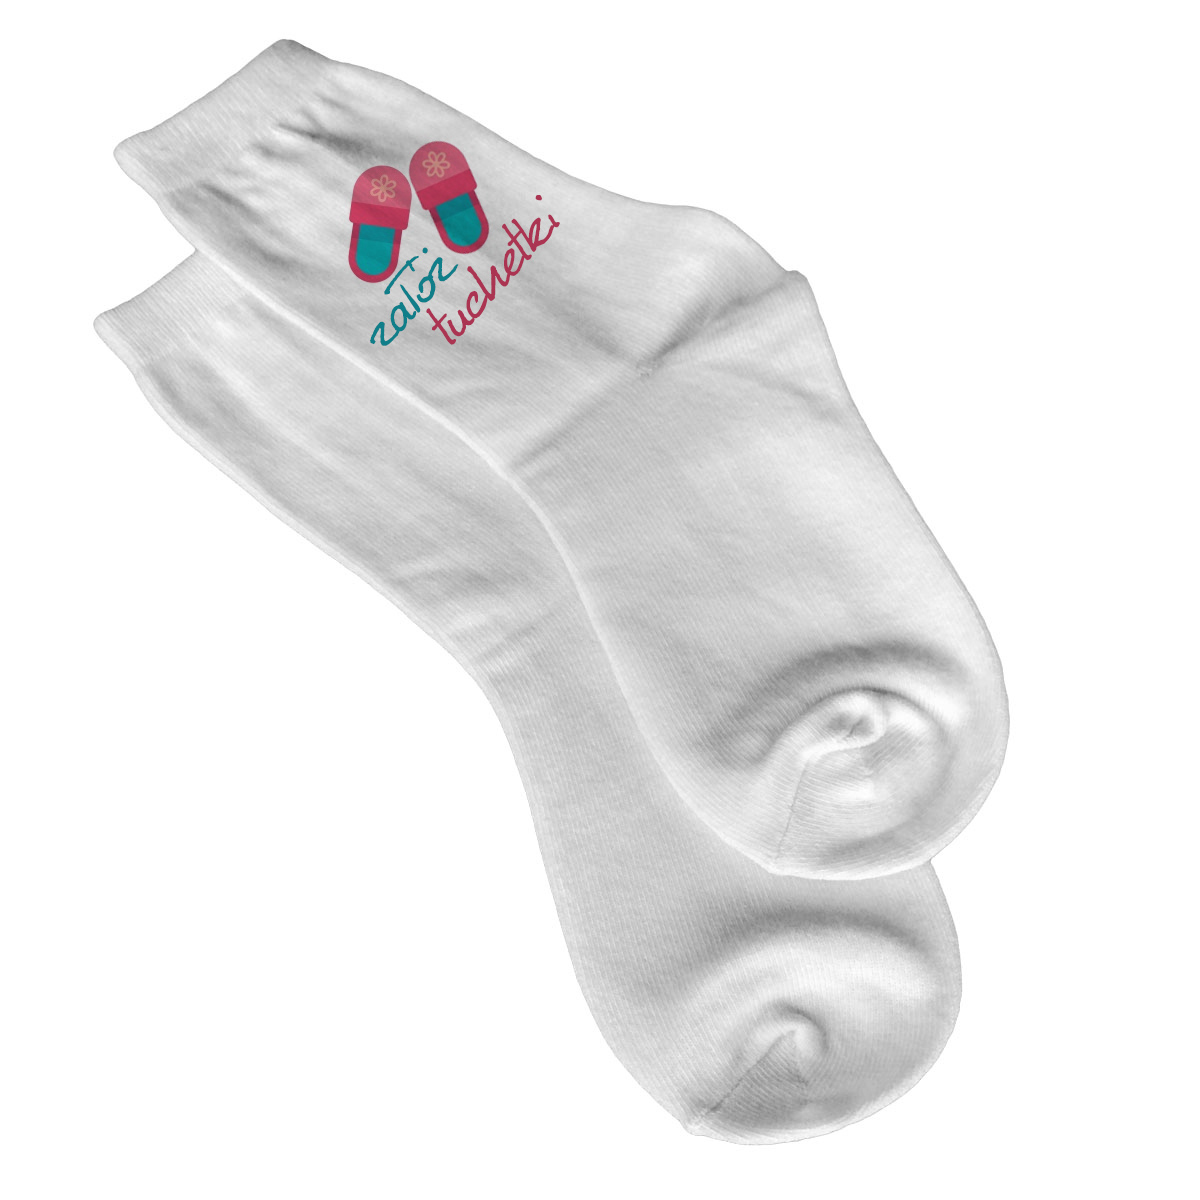 Socks for sublimation - print on the ankle